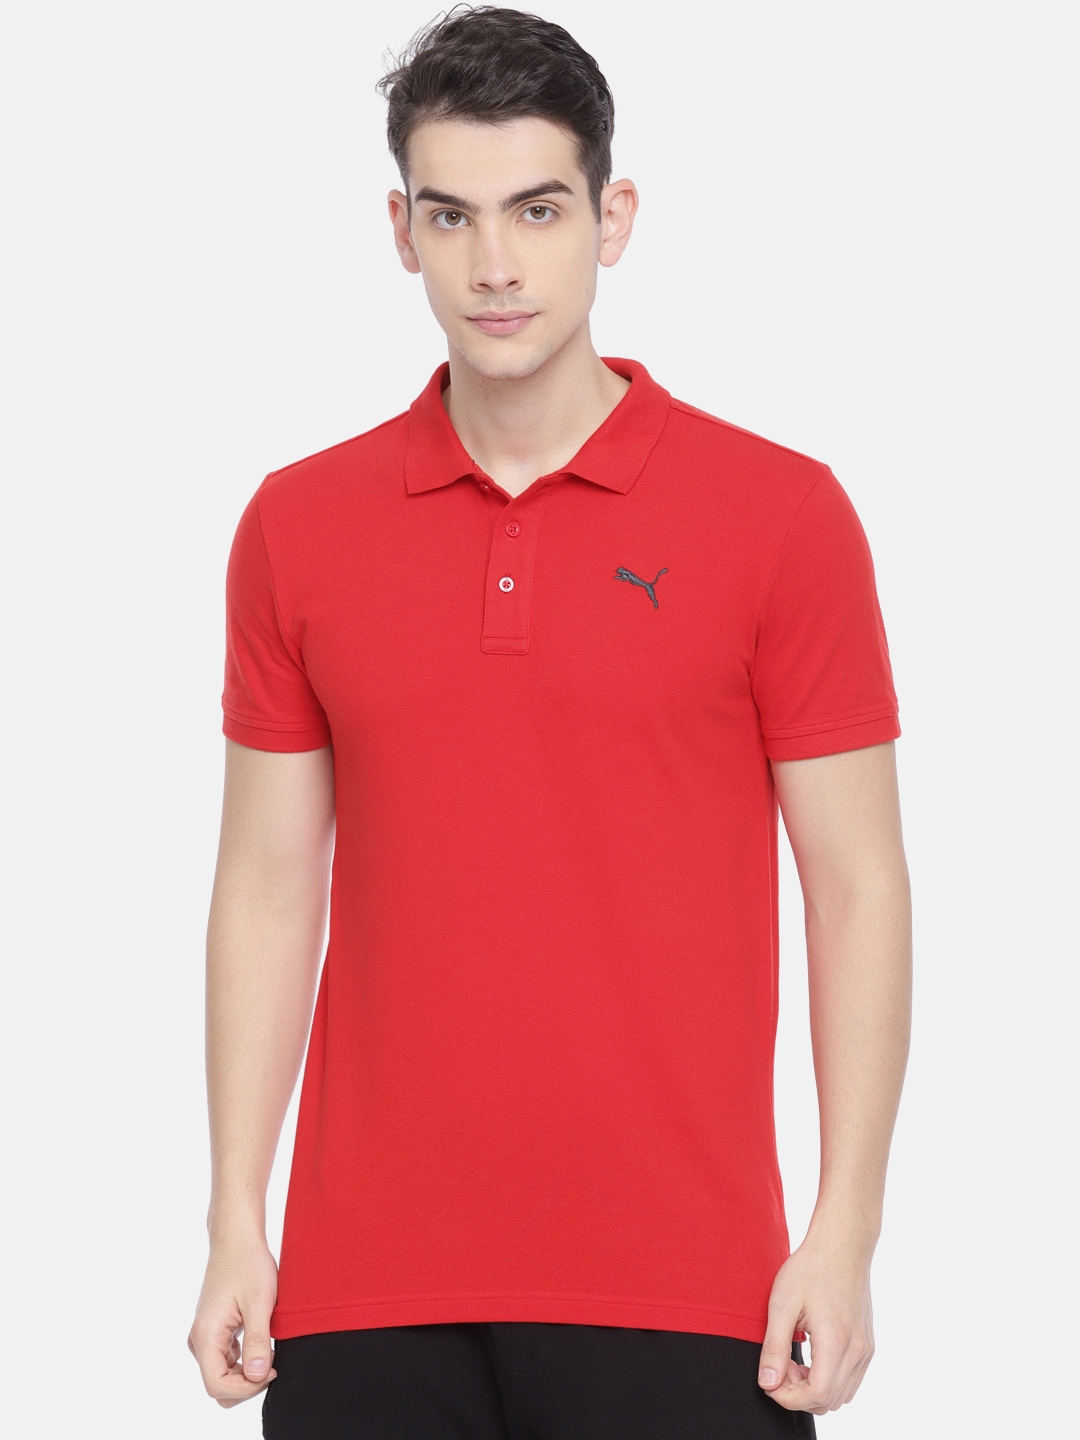 polo t shirts myntra off 52% - findus.co.il